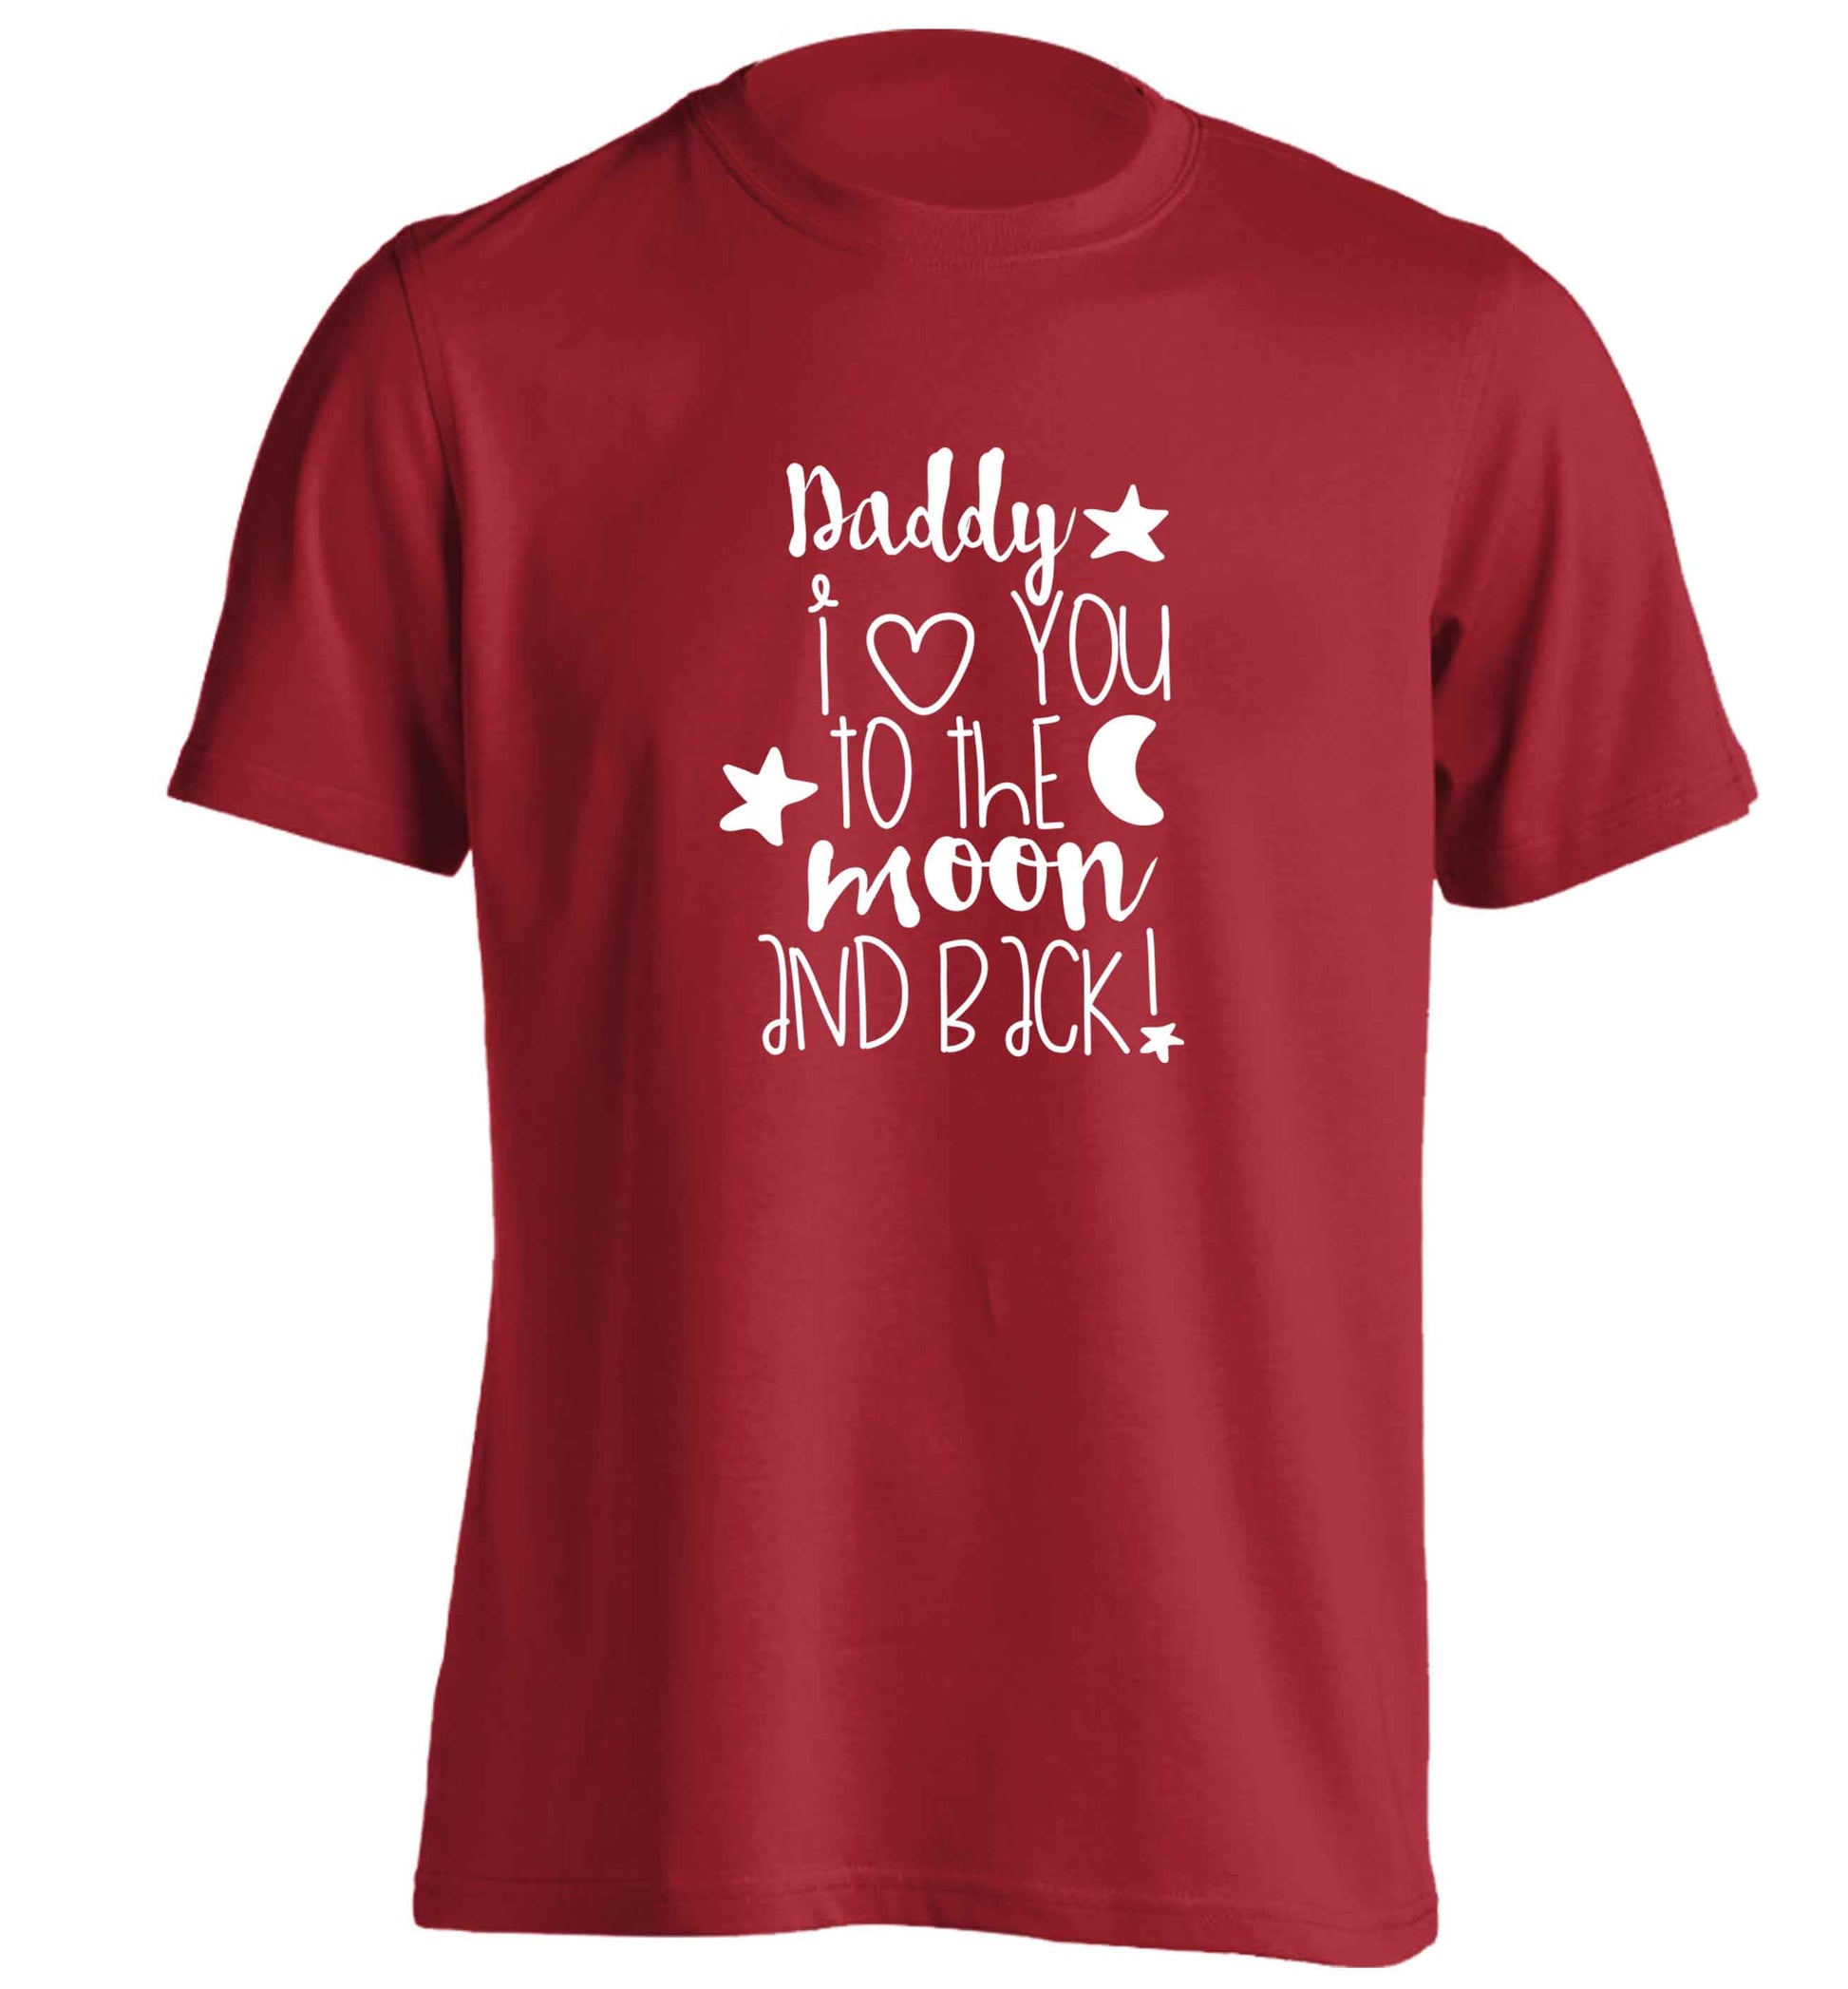 Daddy I love you to the moon and back adults unisex red Tshirt 2XL